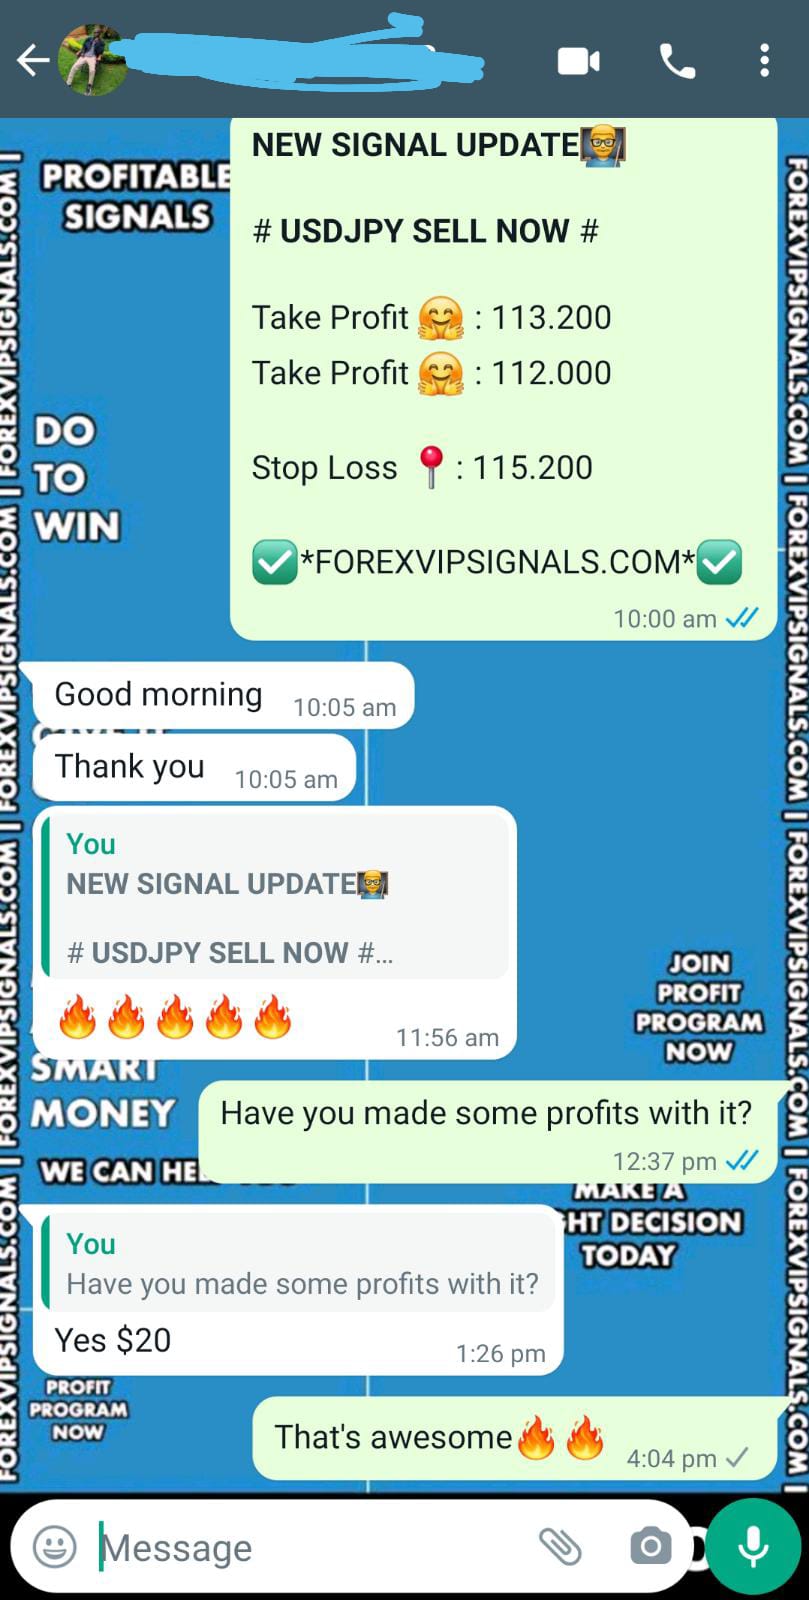 copy trader by forex vip signals